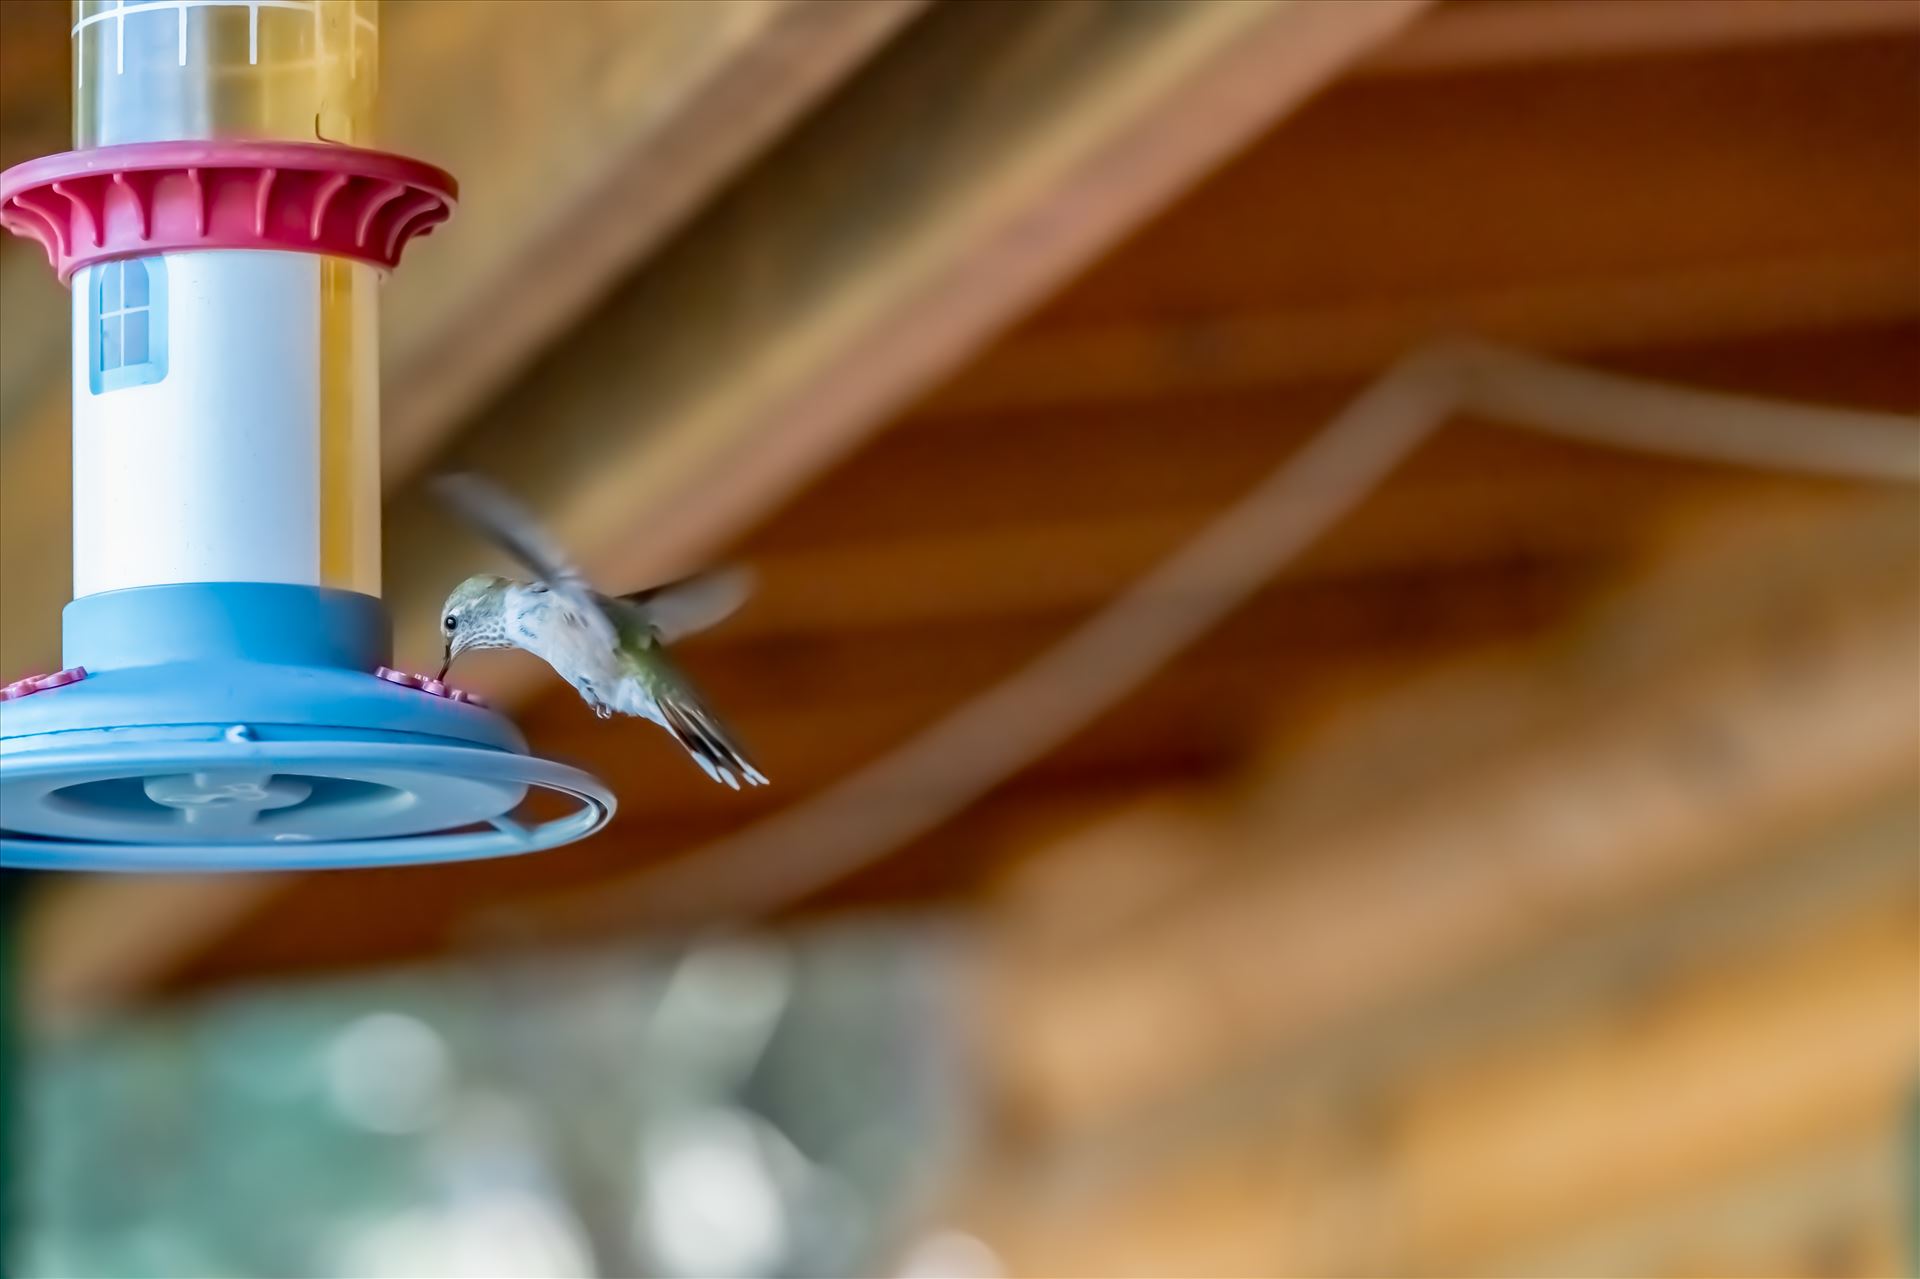 hummingbird at feeder ss as.jpg Hummingbird drinking sugar water from feeder. Cloudcroft New Mexico, Lincoln National Forest. by Terry Kelly Photography